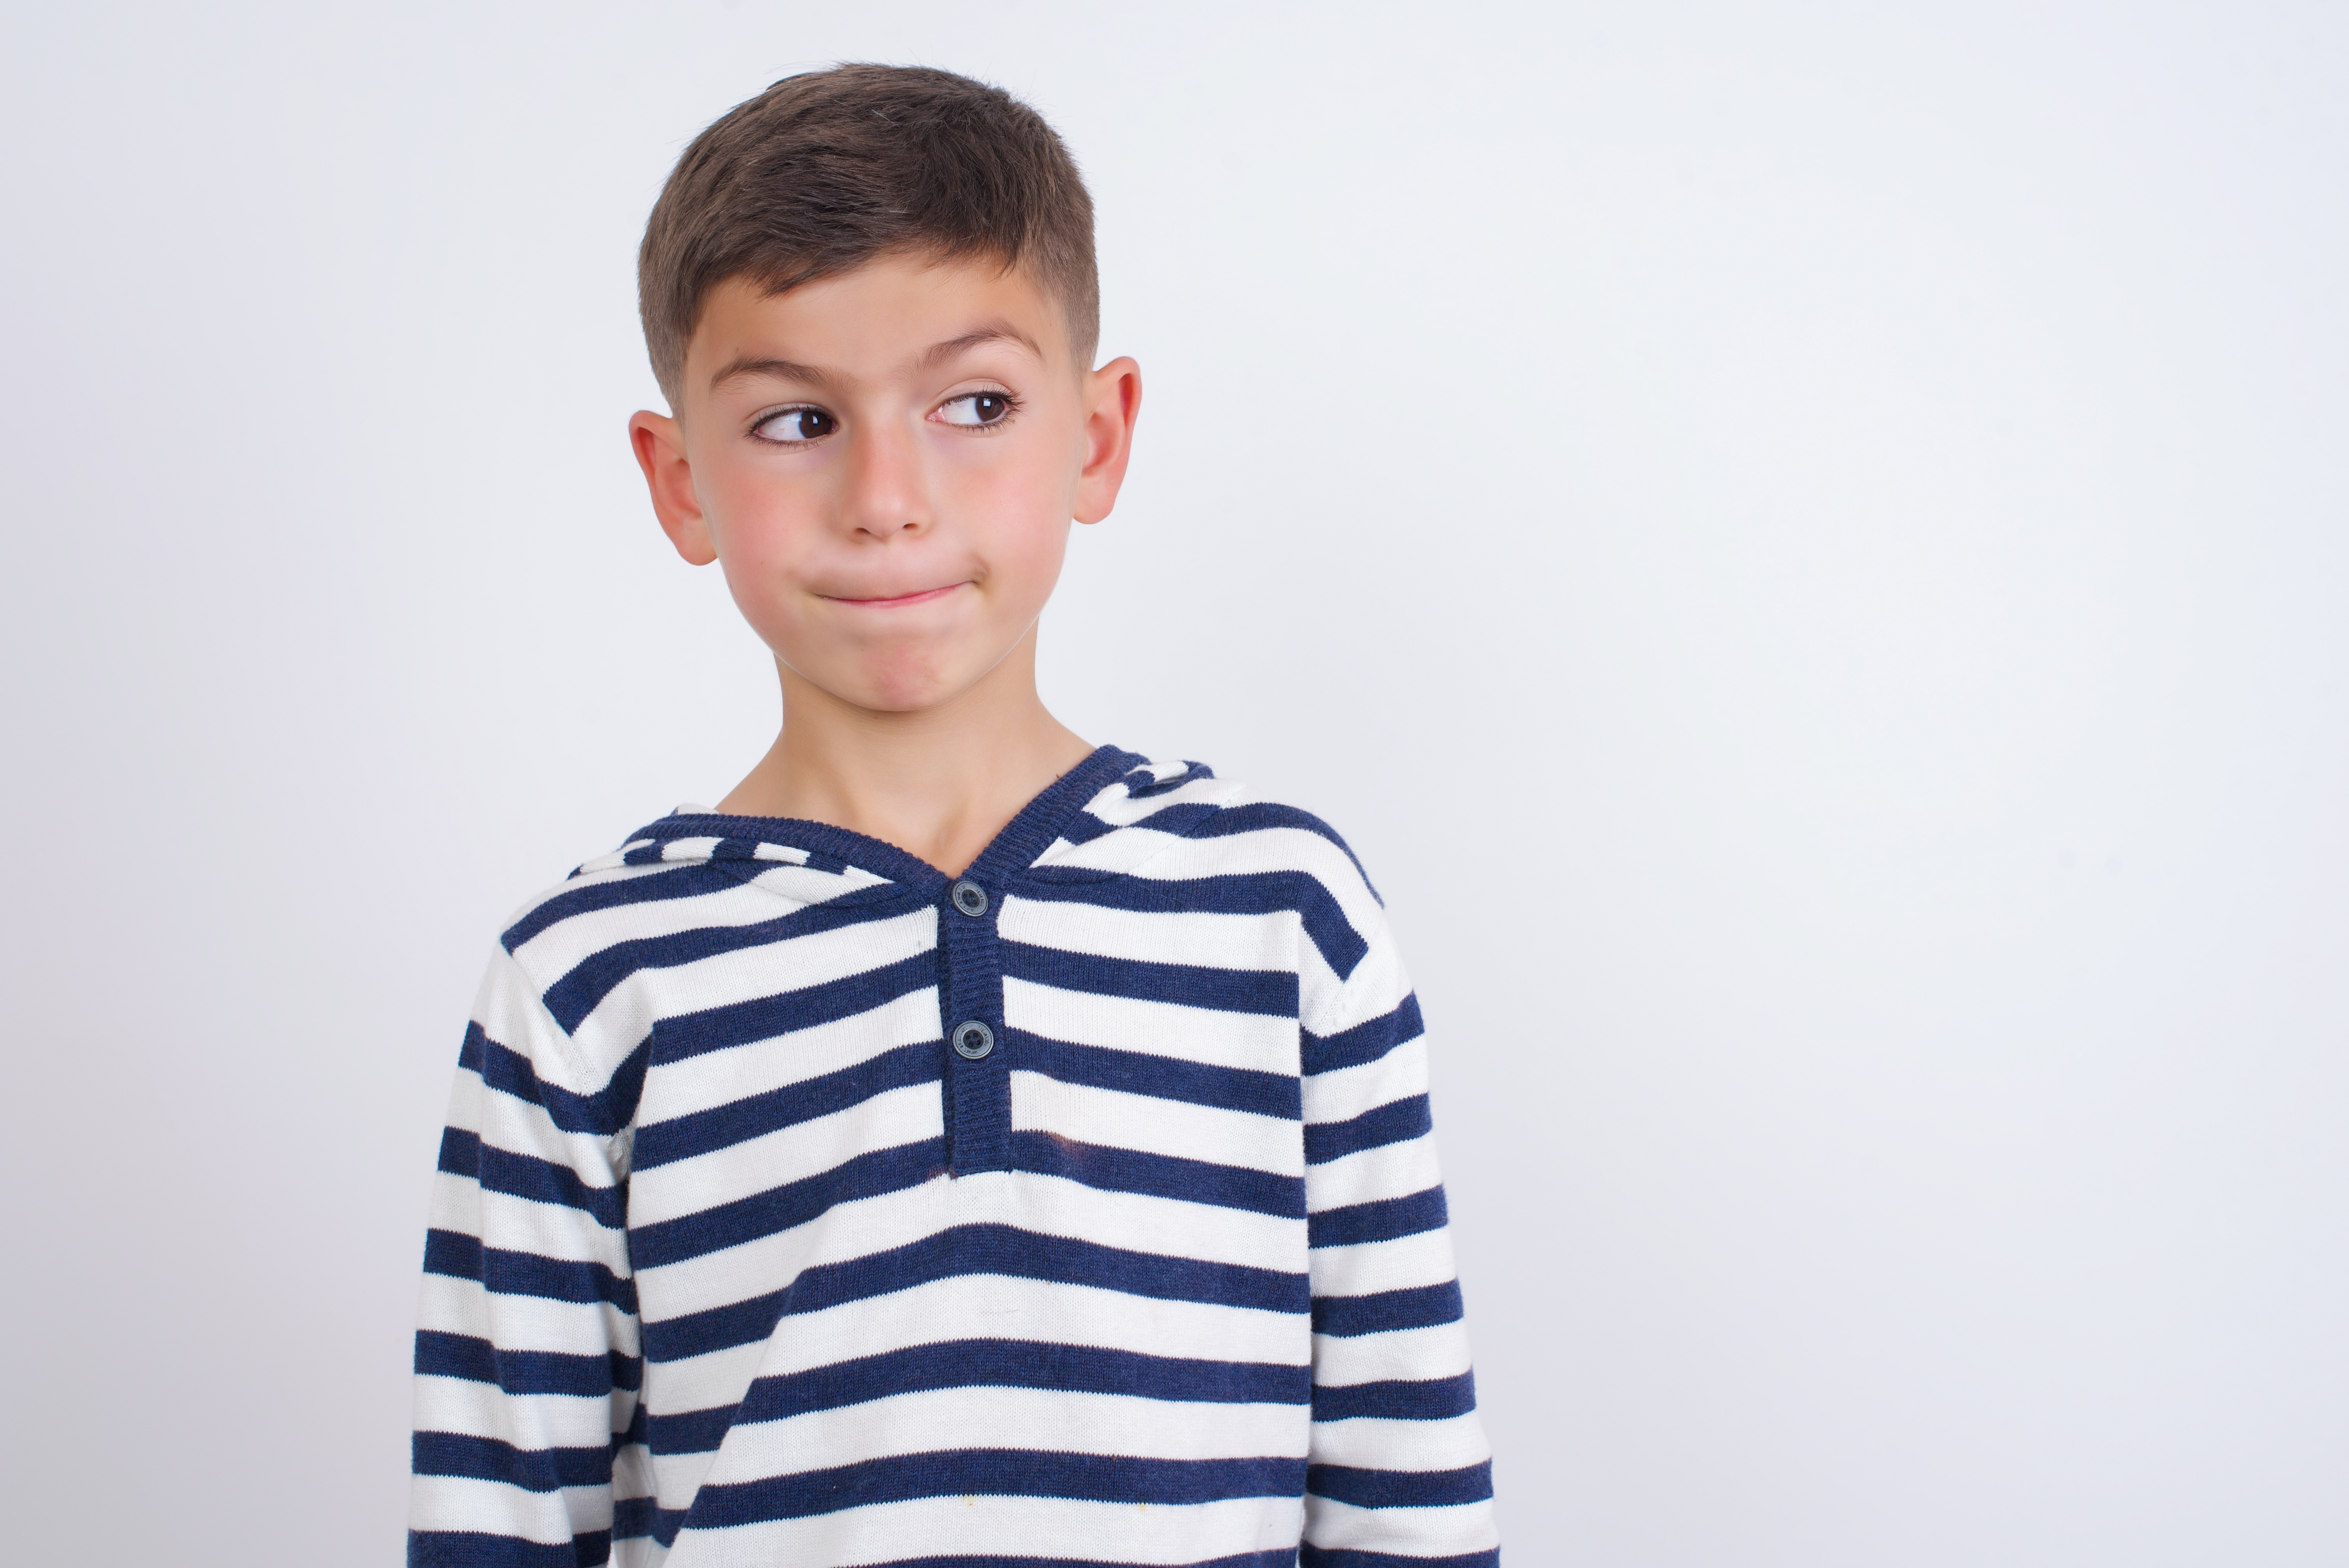 A young boy looking puzzled | Source: Shutterstock